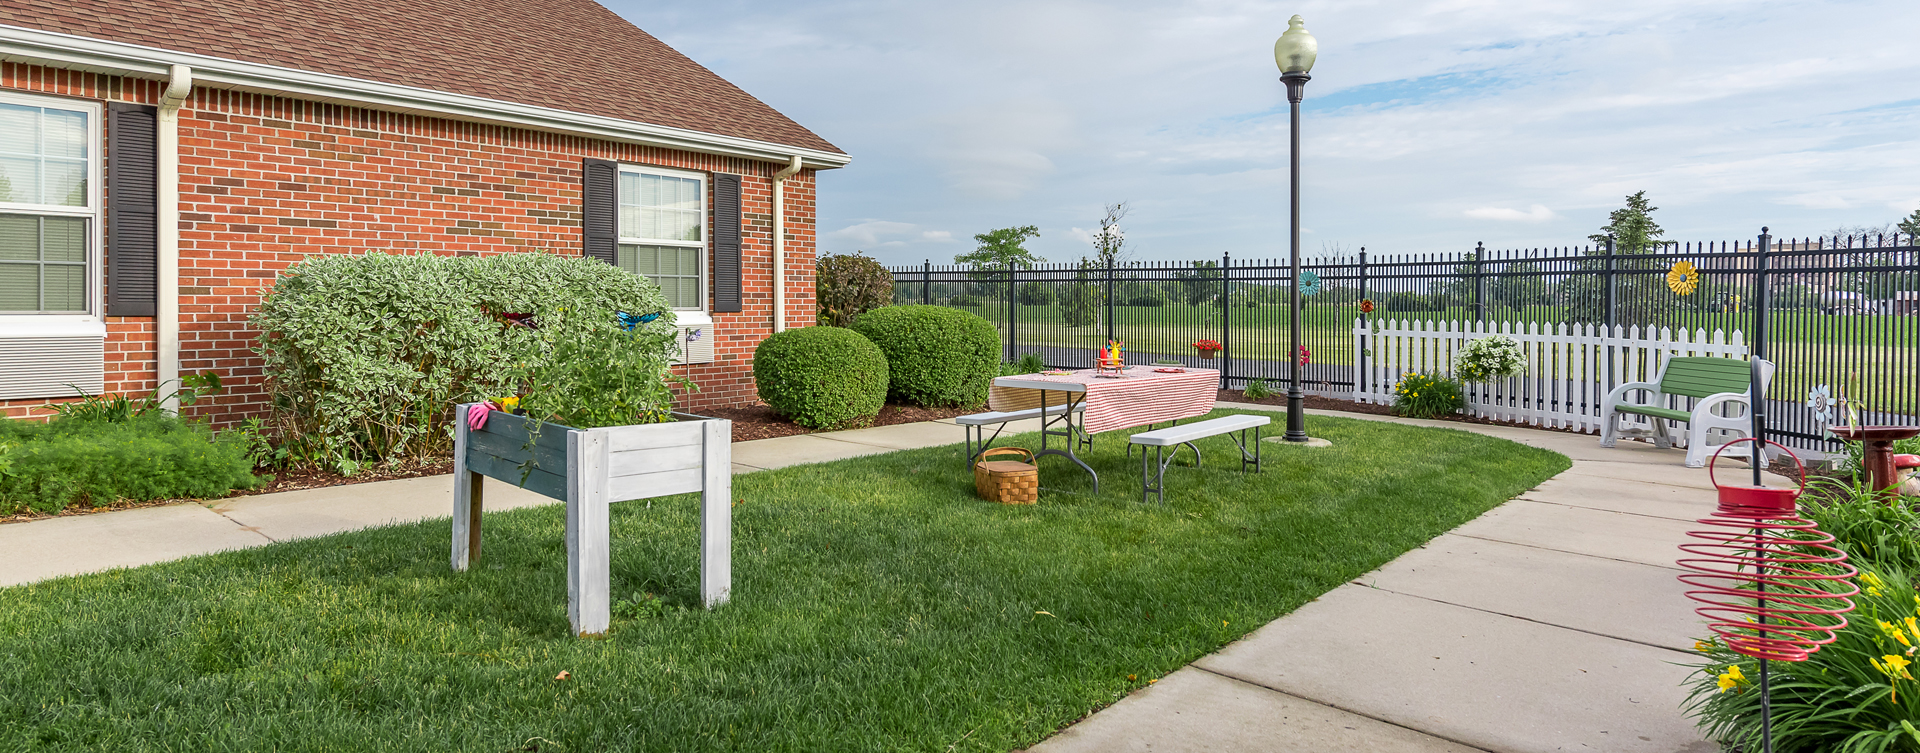 Residents with dementia can enjoy a traveling path, relaxed seating and raised garden beds in the courtyard at Bickford of Saginaw Township